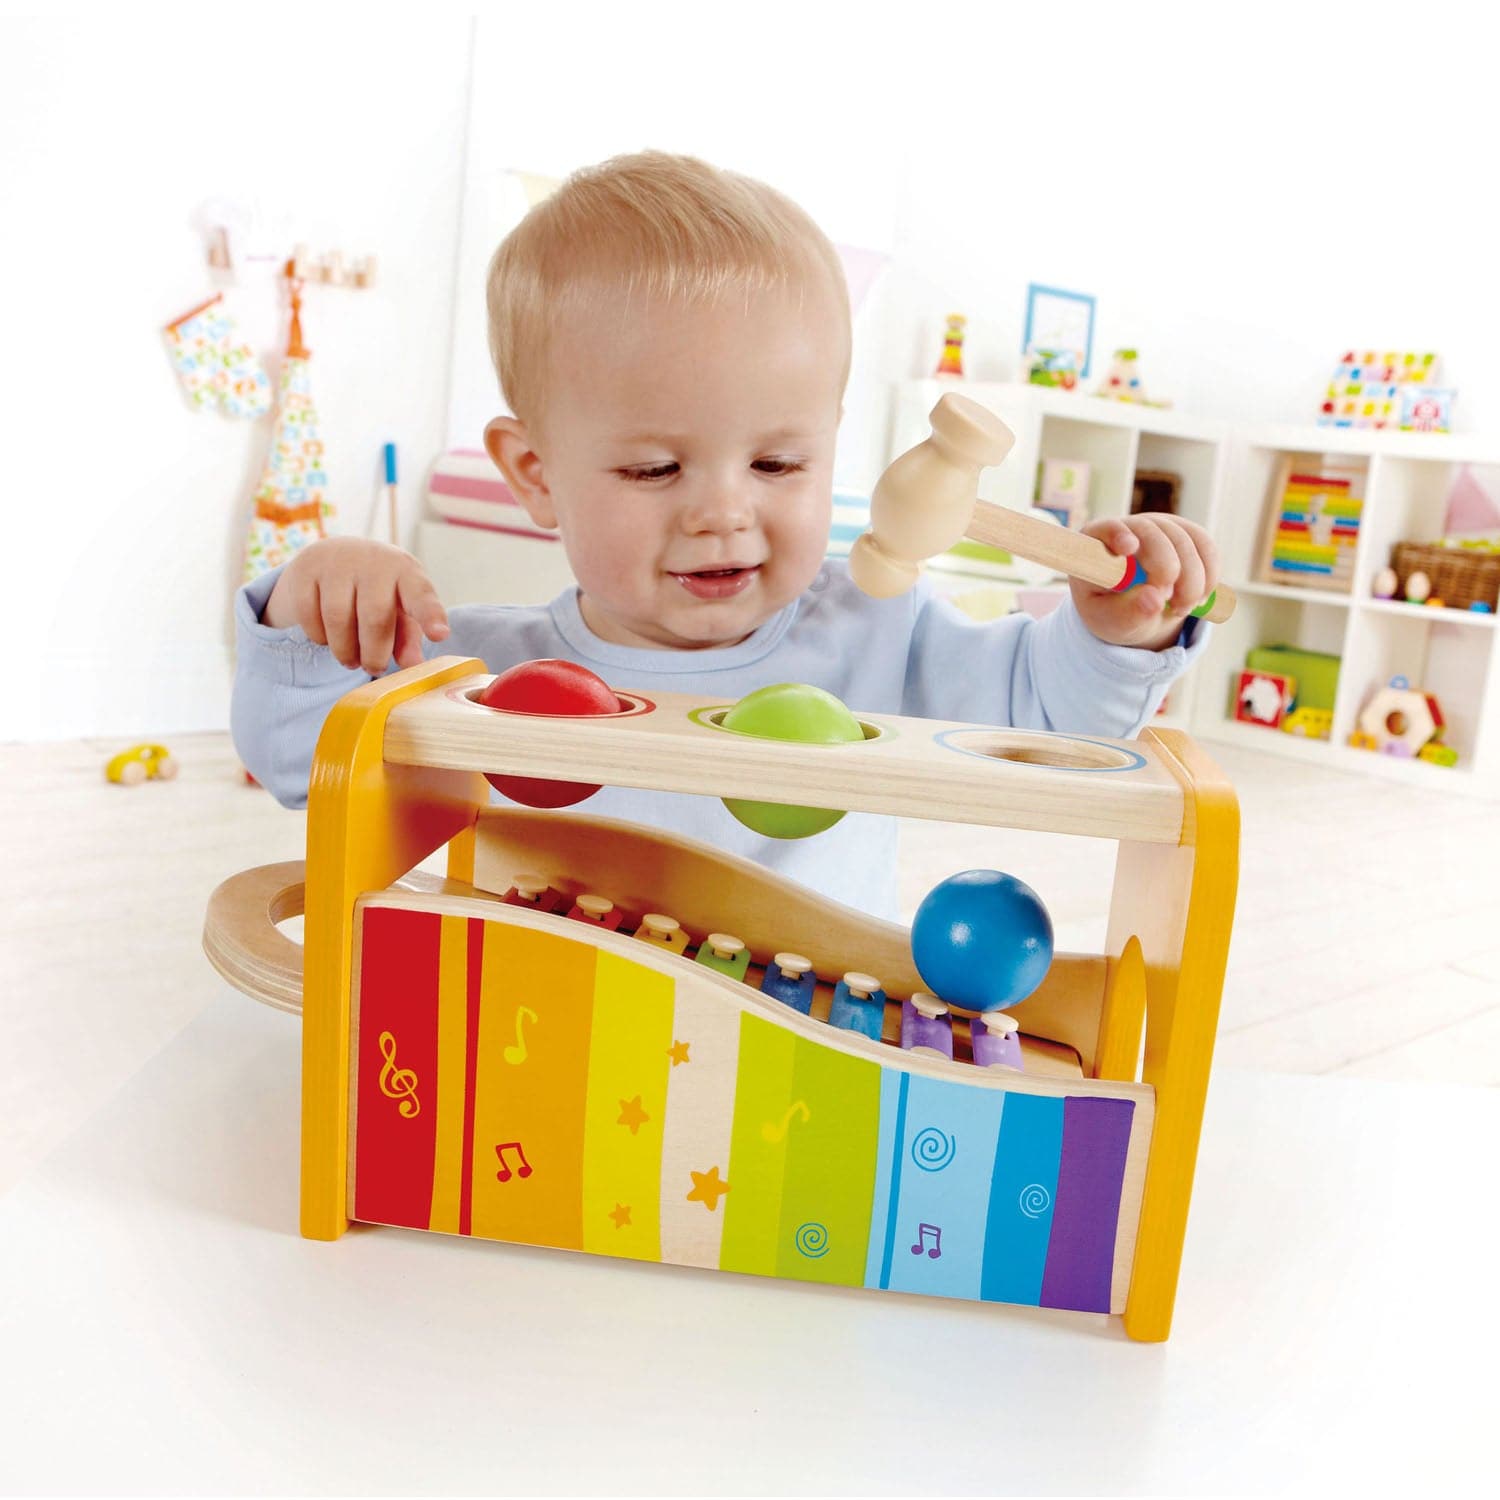 Hape-Pound and Tap Bench-E0305-Legacy Toys